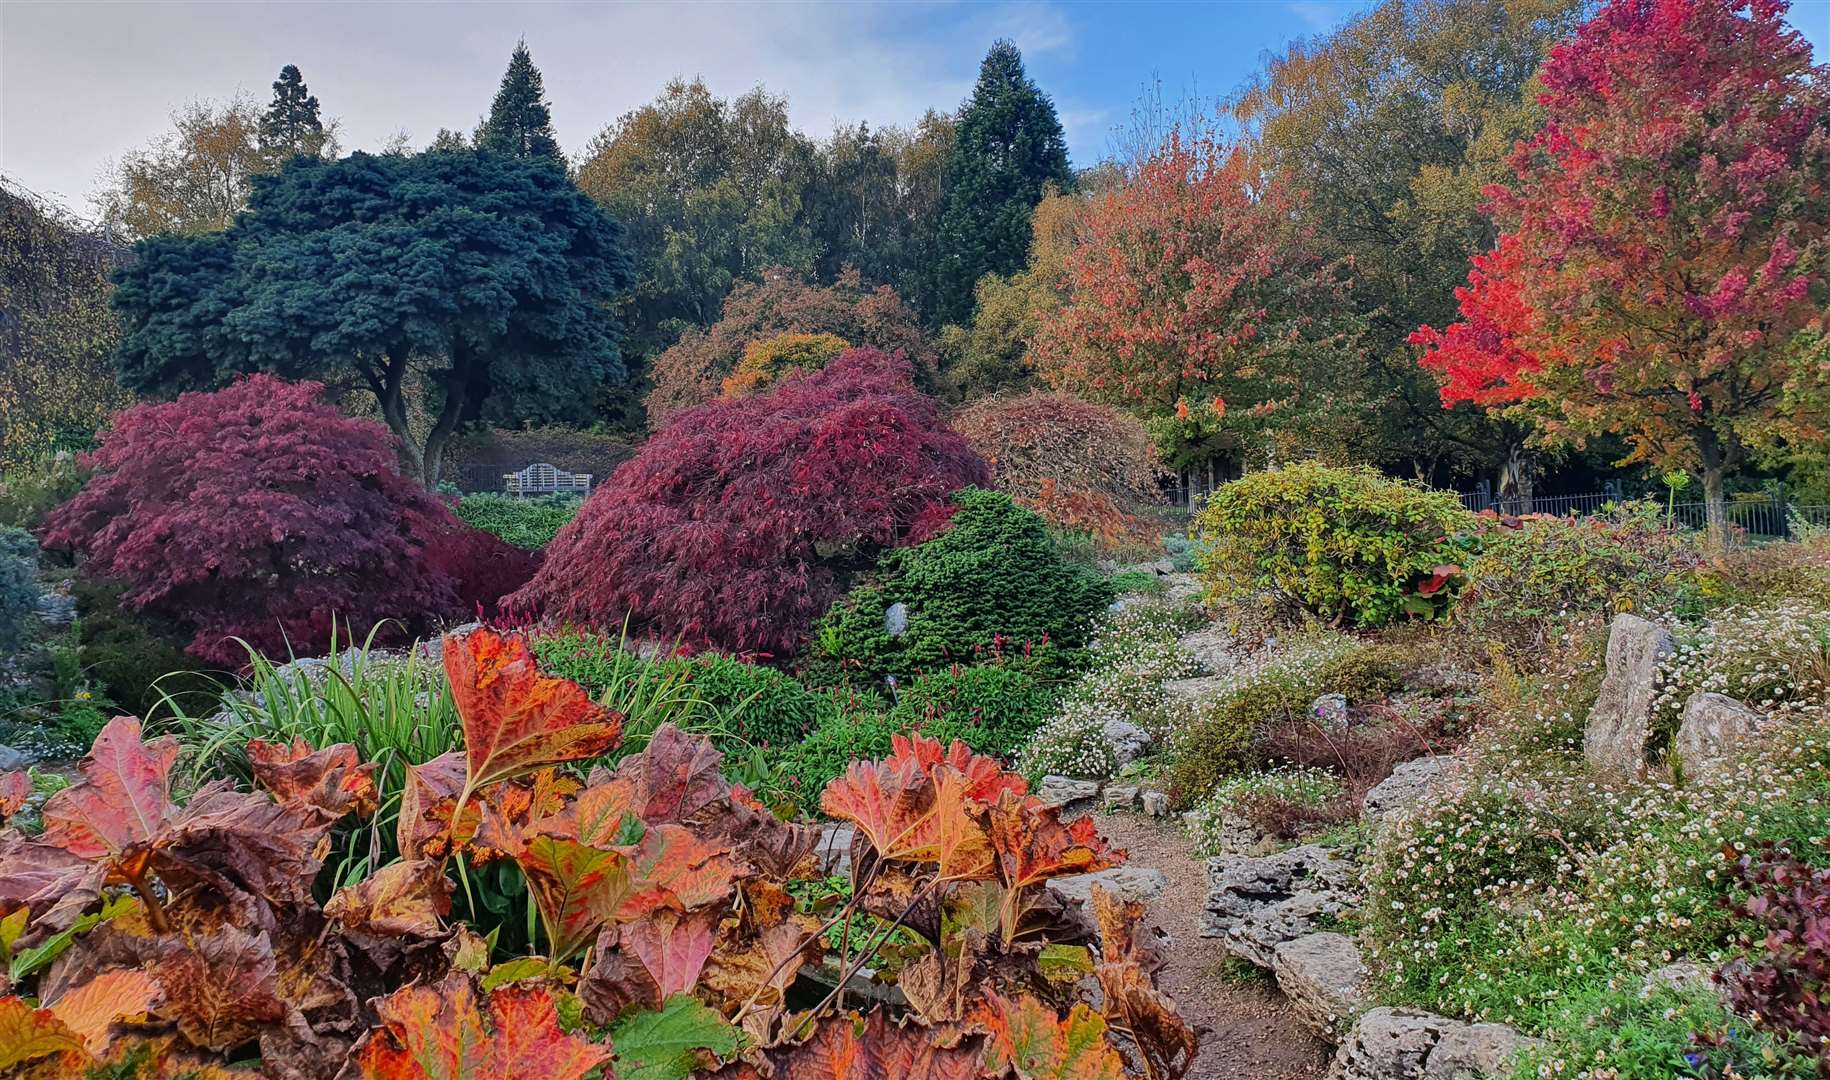 The National Trust garden is full of stunning plants, trees and shrubs. Picture: National Trust Images / Nick Dougan